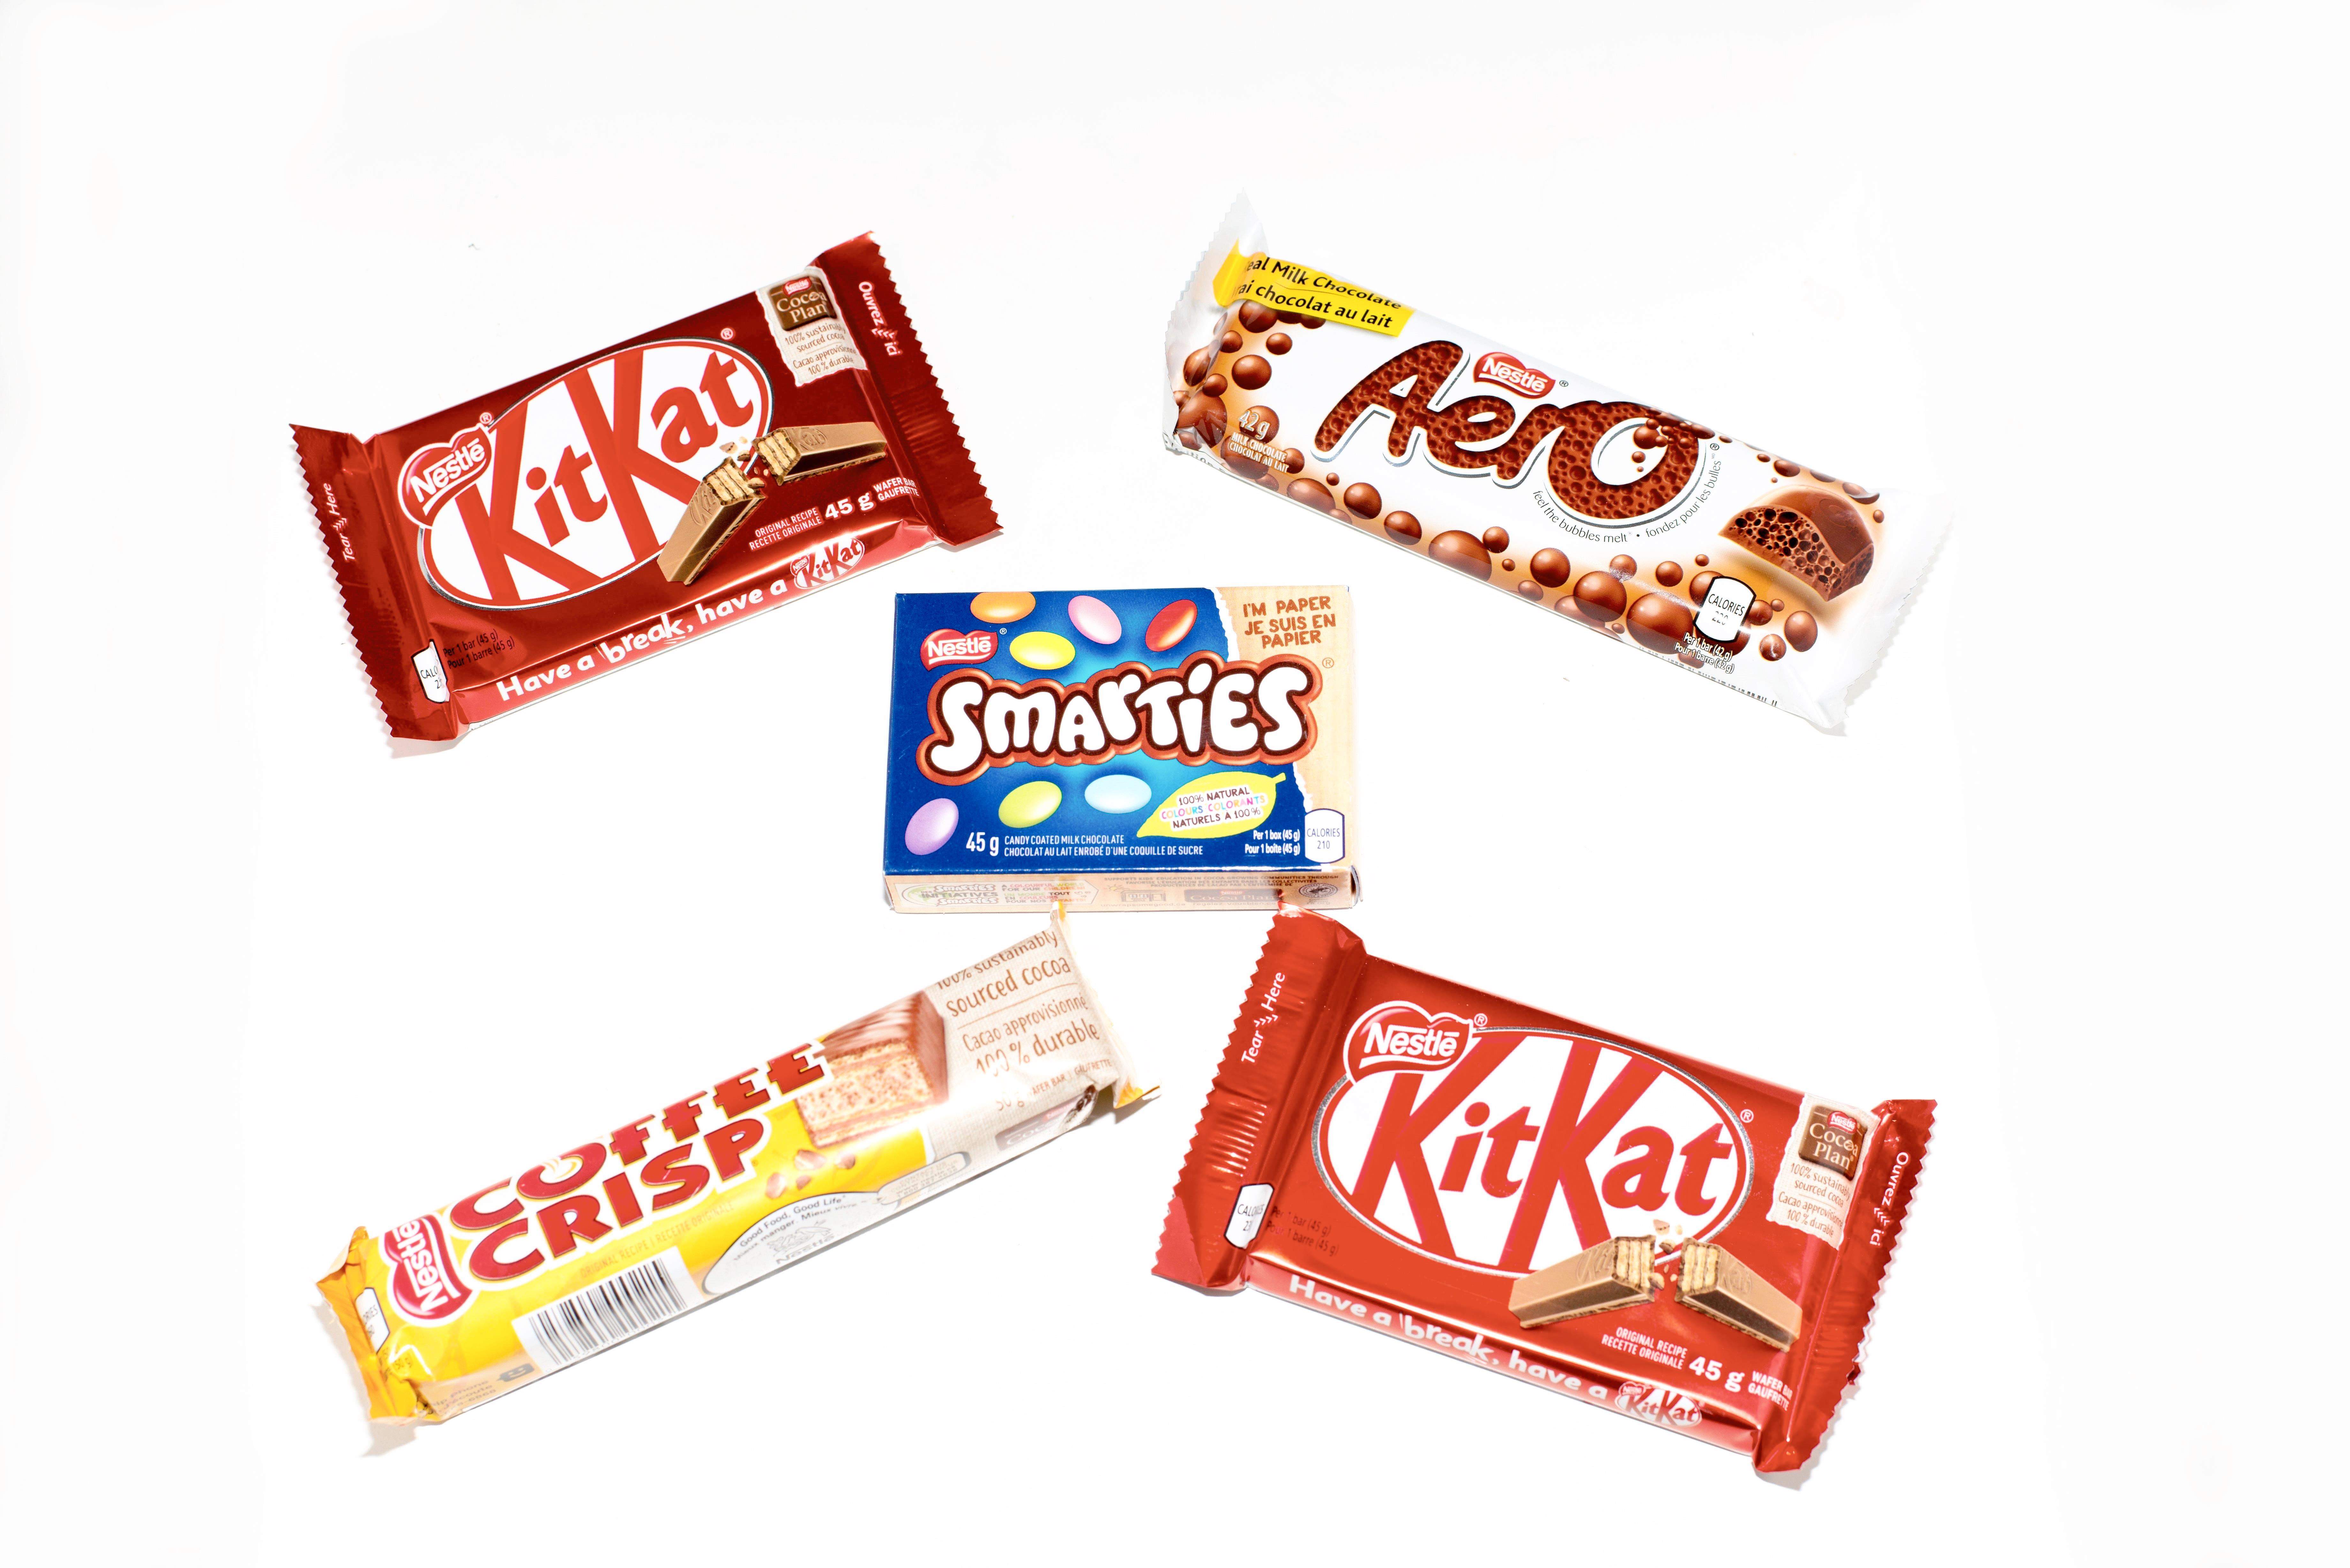 Specially selected for your satisfaction - large array of chocolate bars to be enjoyed